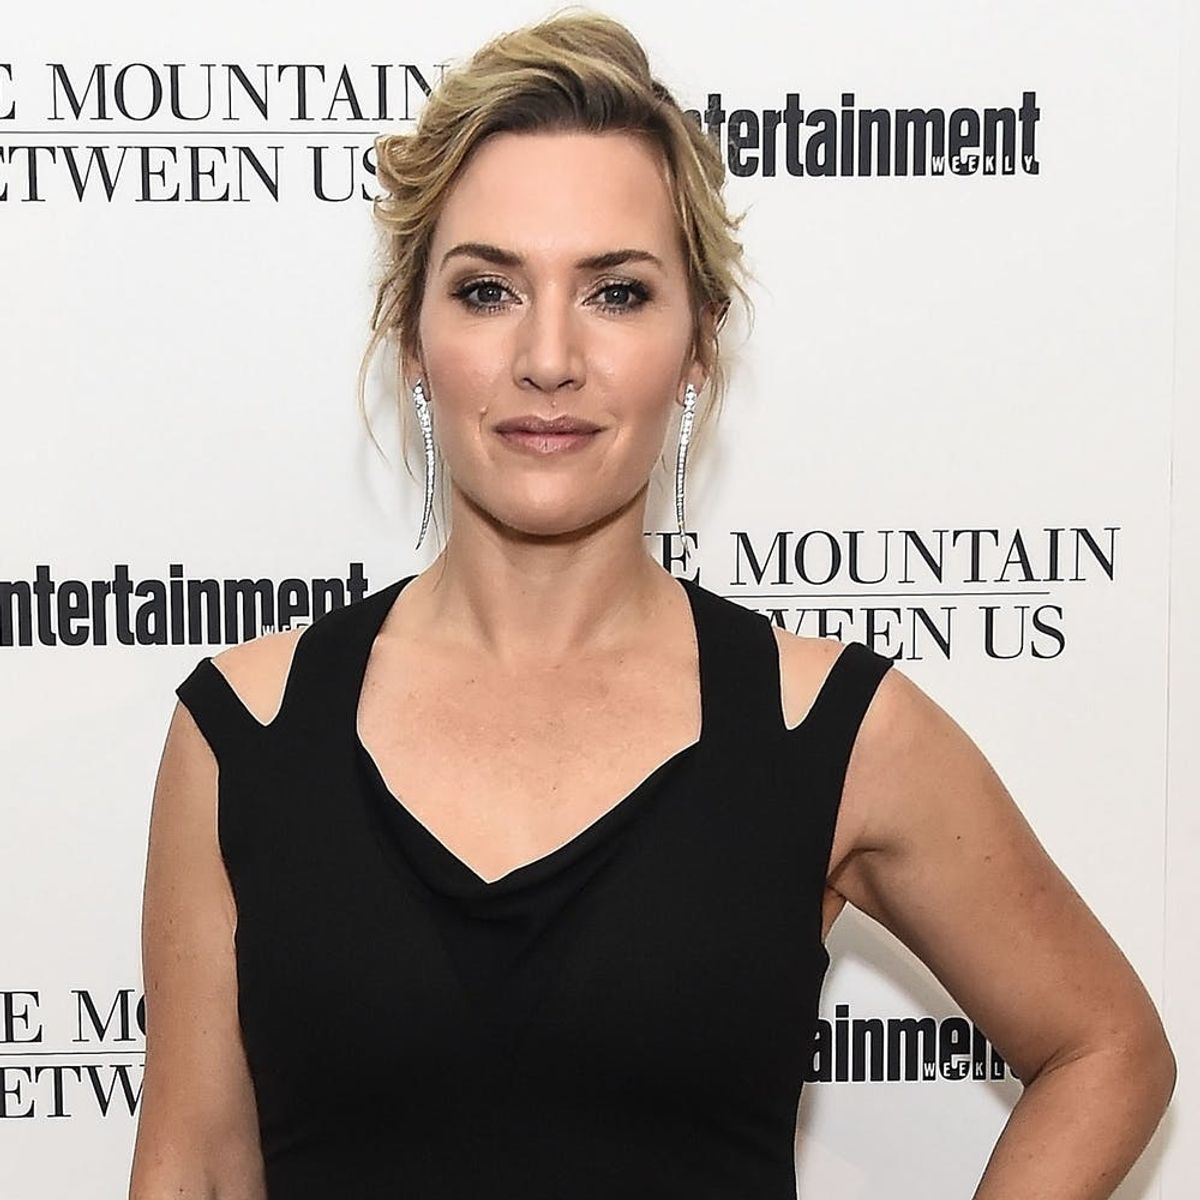 Kate Winslet Once (Accidentally) Cut Off Part of Her Friend’s Ear